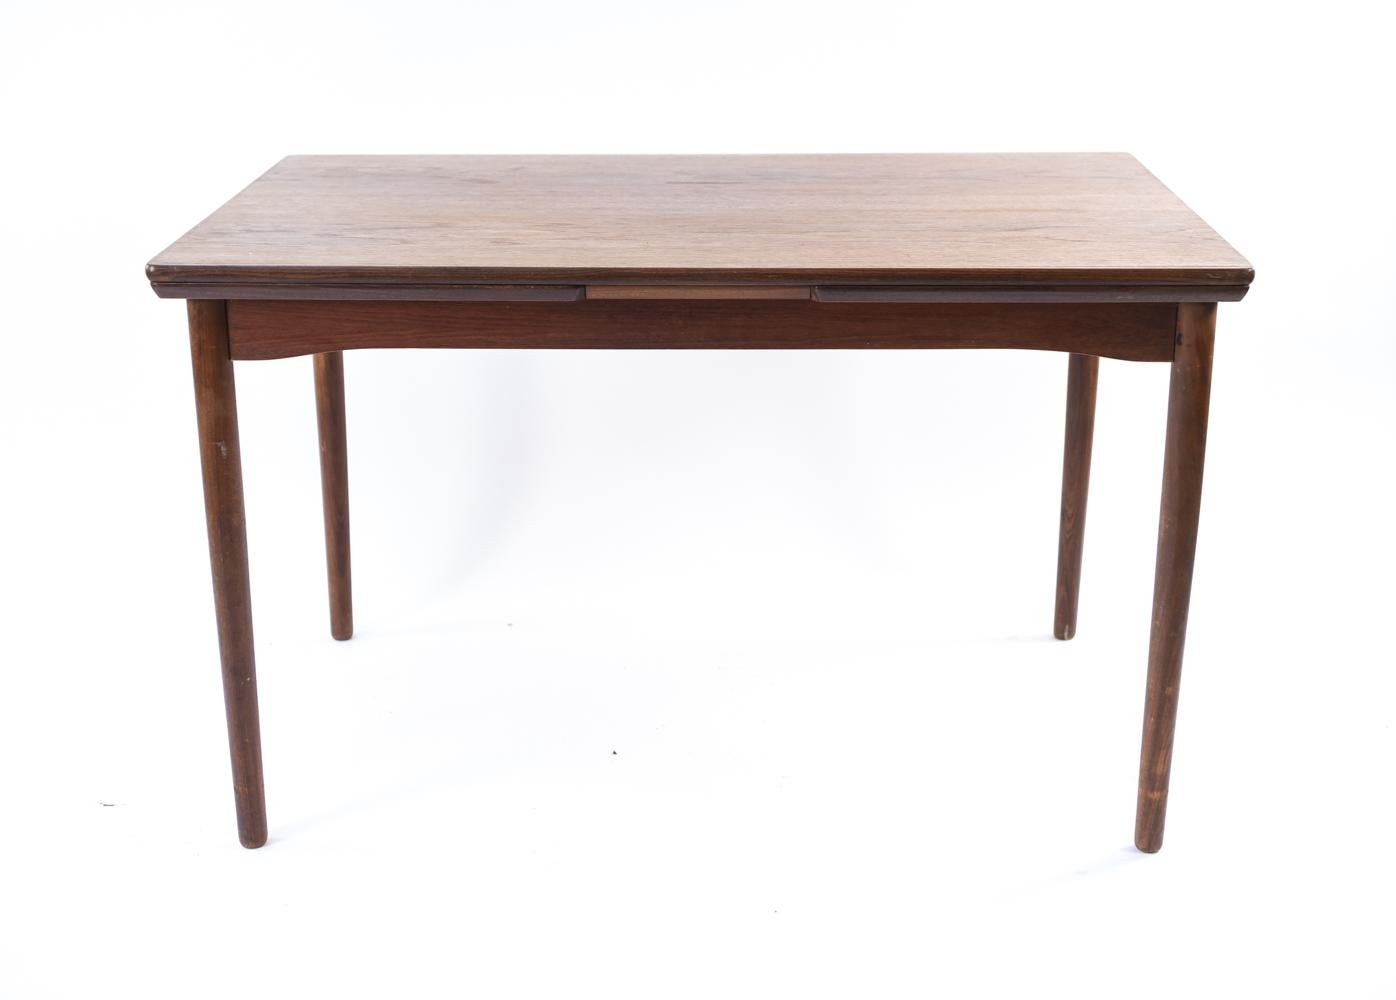 This Danish midcentury teak dining table features two pullout / pull-out leaves to accommodate additional people. A simple, timeless design whose versatility allows it to be used in any dining room.